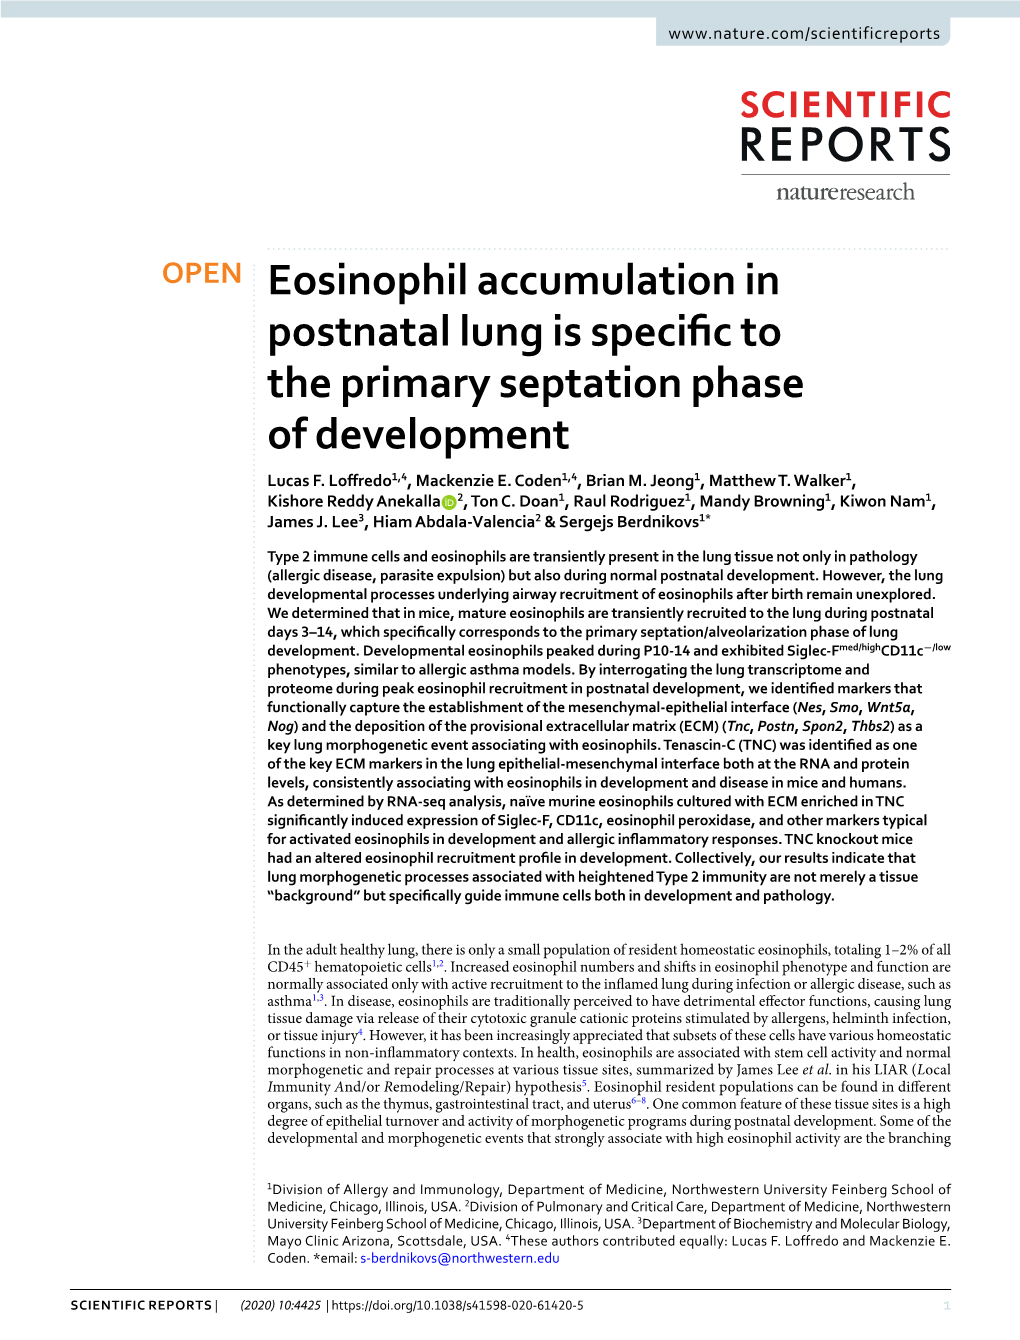 Eosinophil Accumulation in Postnatal Lung Is Specific to the Primary